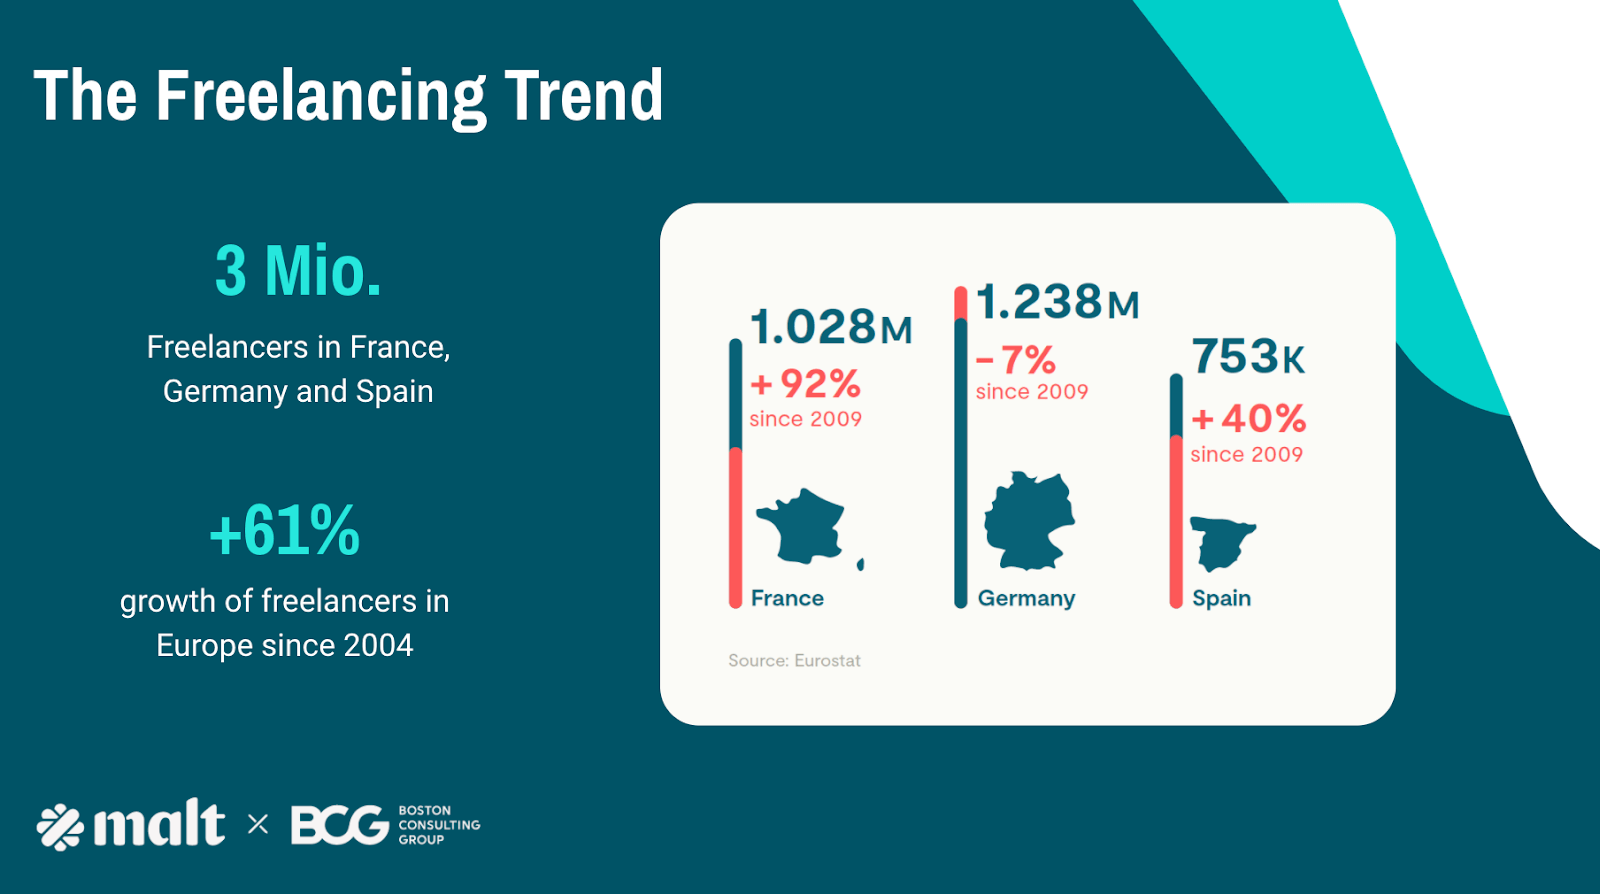 An infographic showing that over 3m people in France, Germany and Spain are freelancers working in professional services.